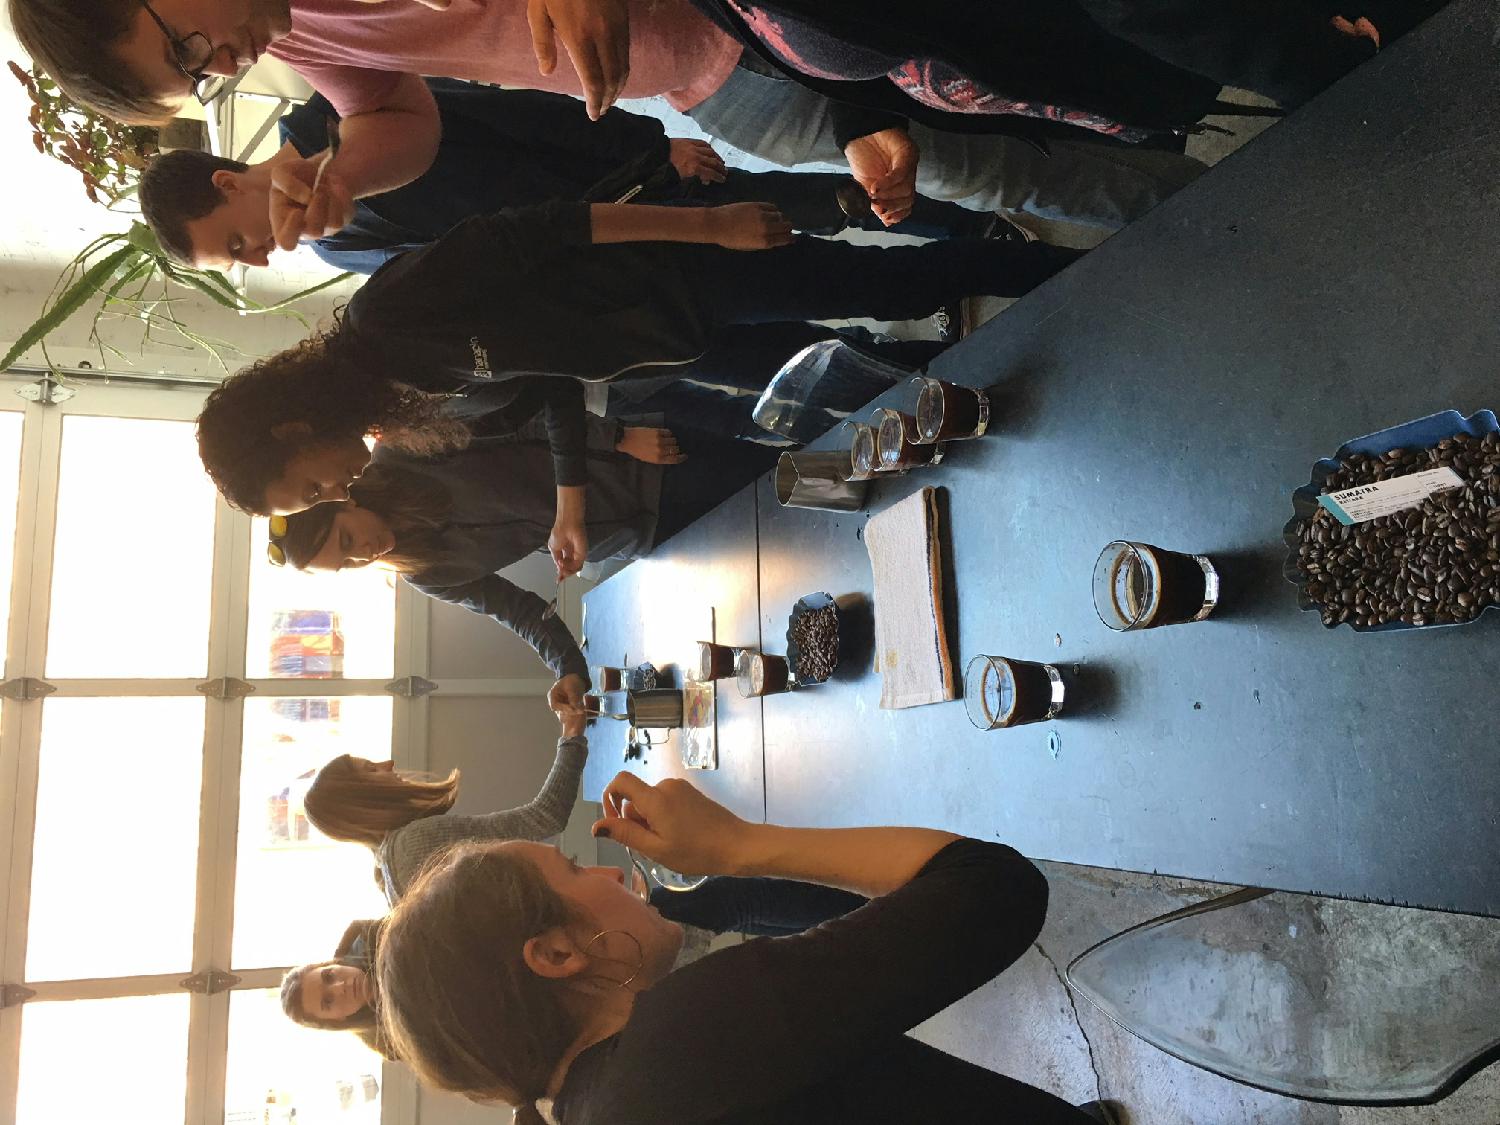 Our team enjoying a cupping event at a local coffee shop.